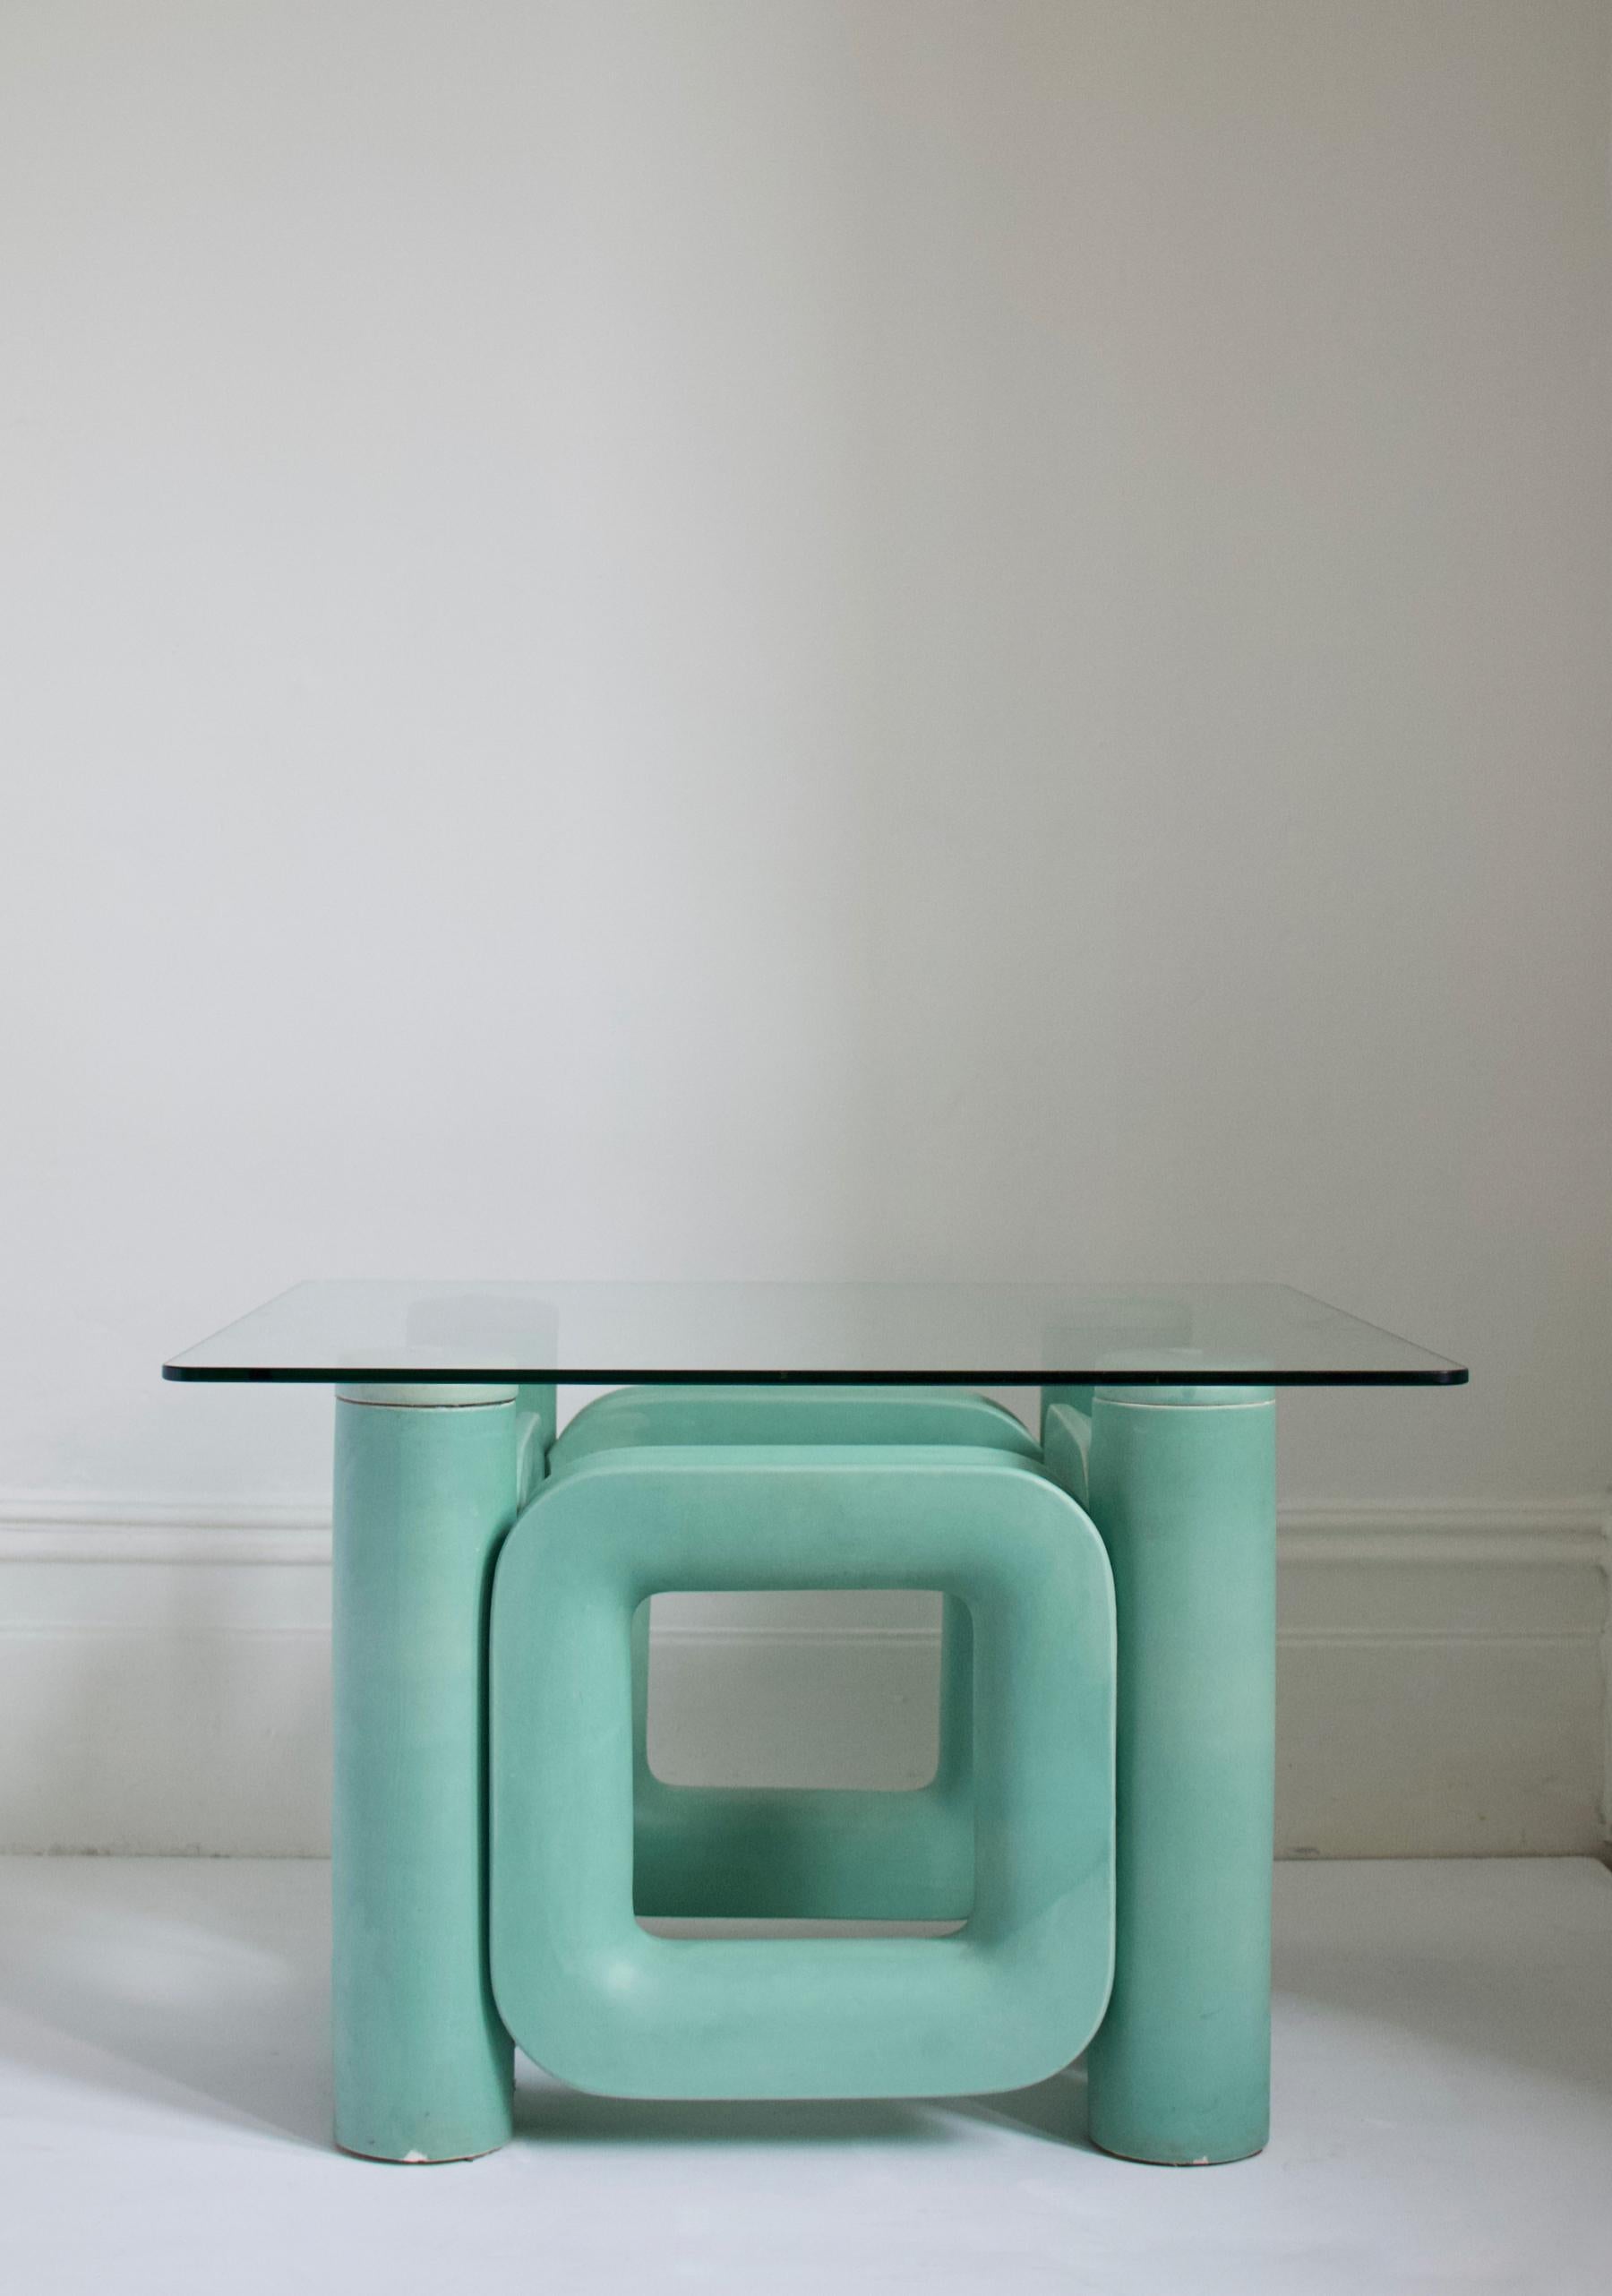 Sculptural ceramic coffee table with blue-turquoise satin glaze, Italy, 1970s

Striking sculptural base, in heavy ceramic, with simple glass top. The glaze is a single colour, with some areas showing slightly thicker or thinner application giving